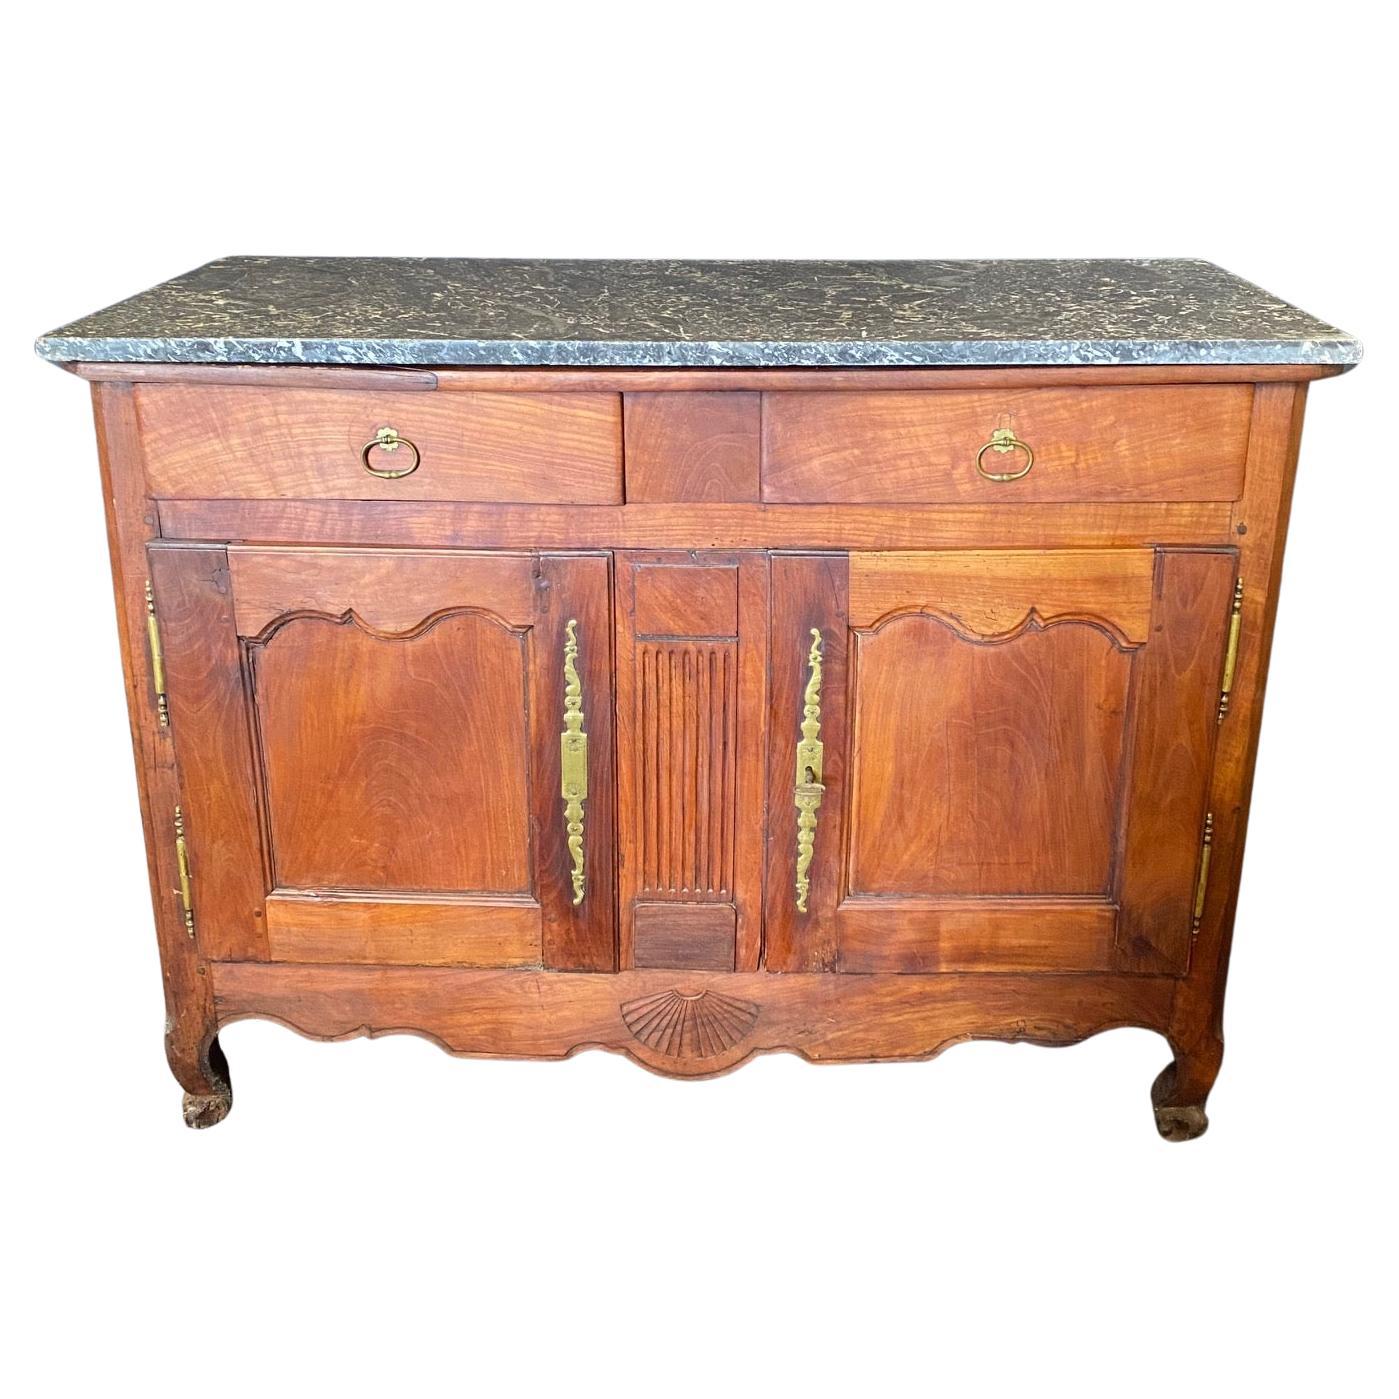 French Provincial Early 19th Century Buffet Sideboard